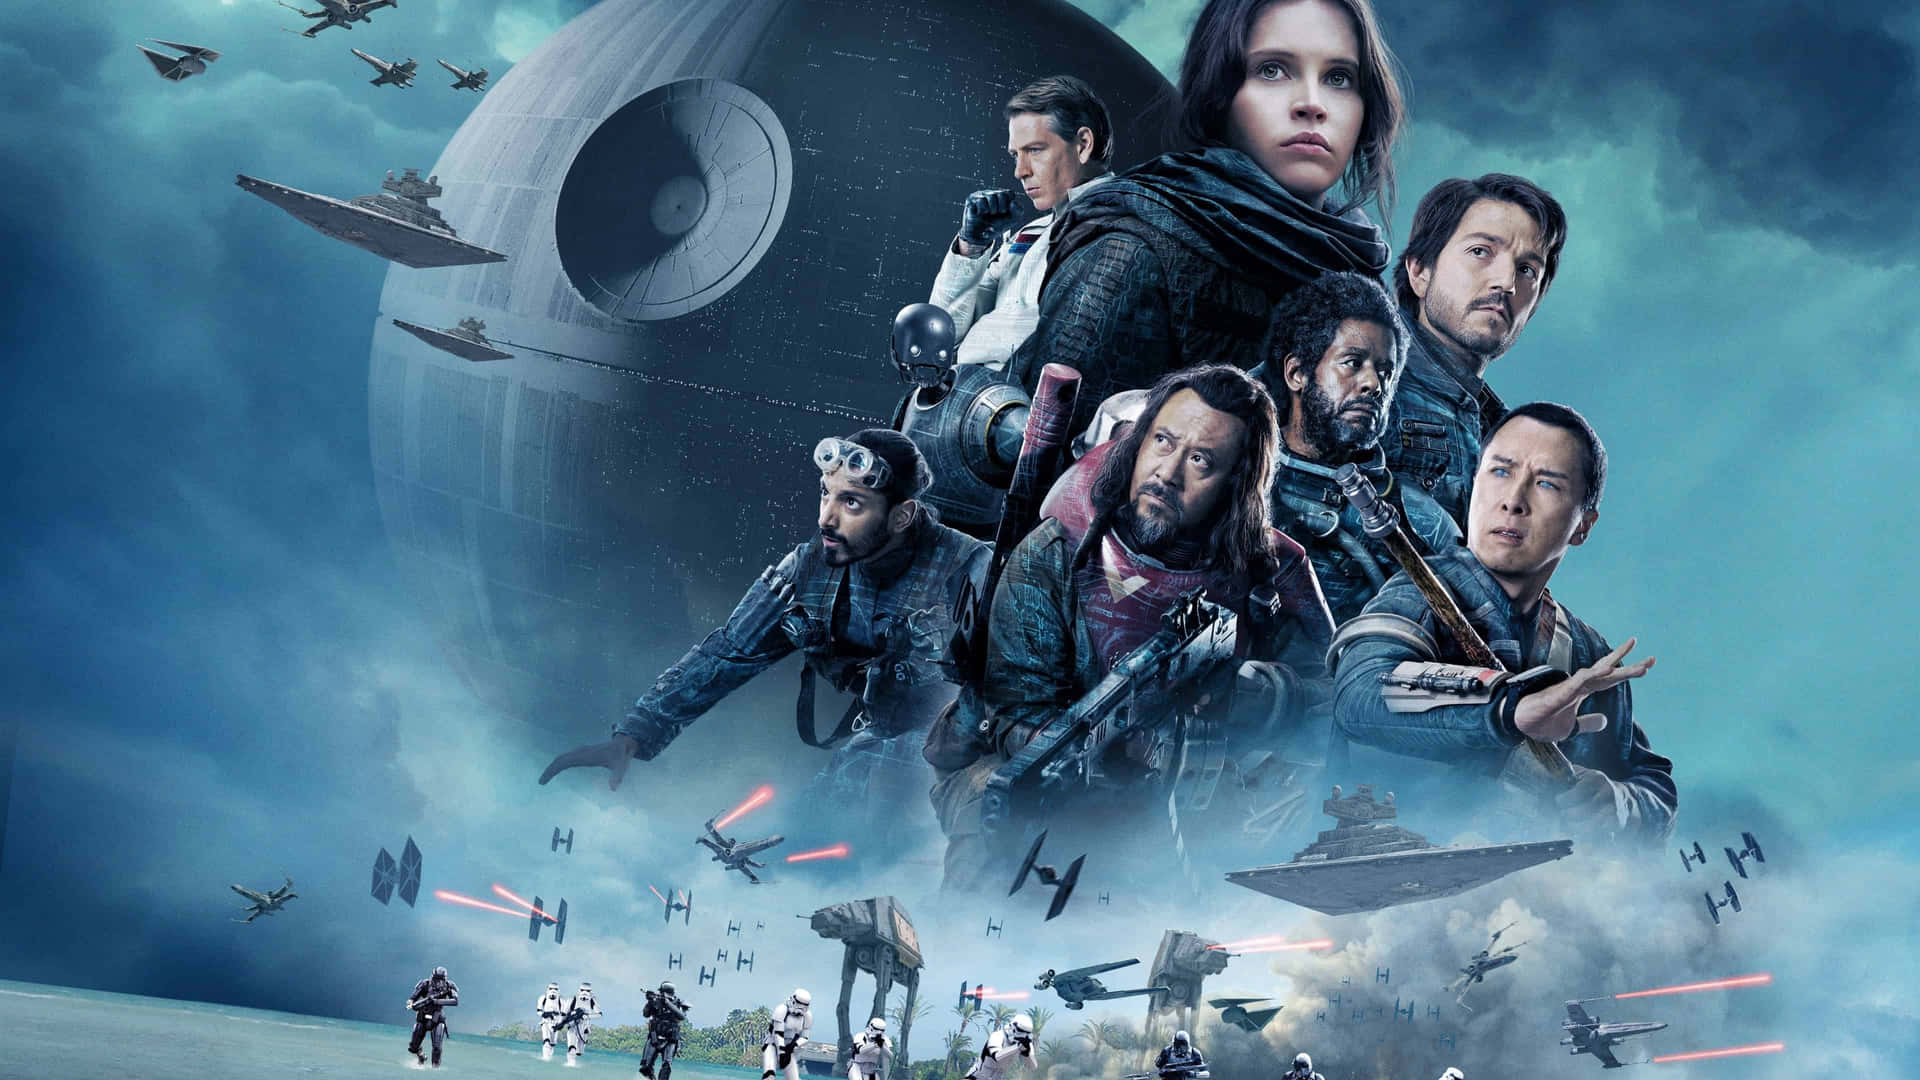 Rogue One: A Star Wars Story is a 2016 American epic space opera film, the first of a series of spin-off films from the Star Wars franchise. - Rogue